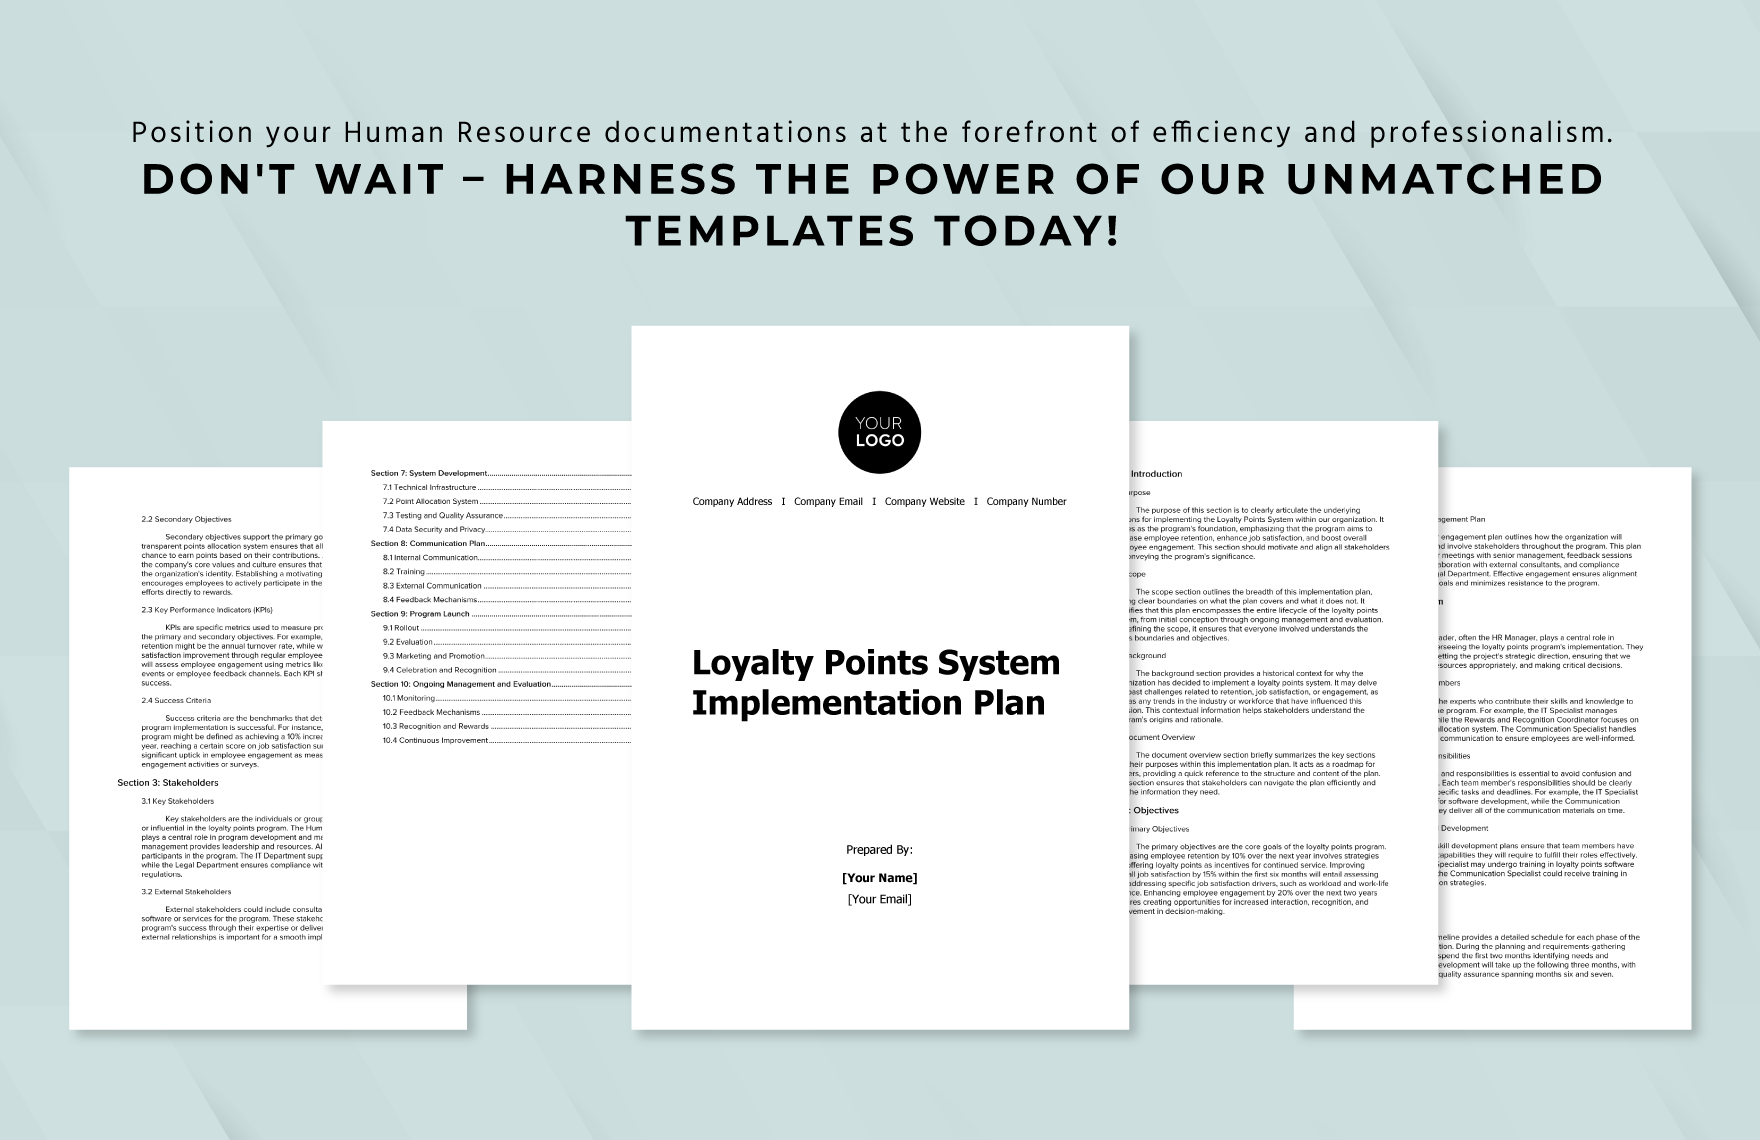 Loyalty Points System Implementation Plan HR Template